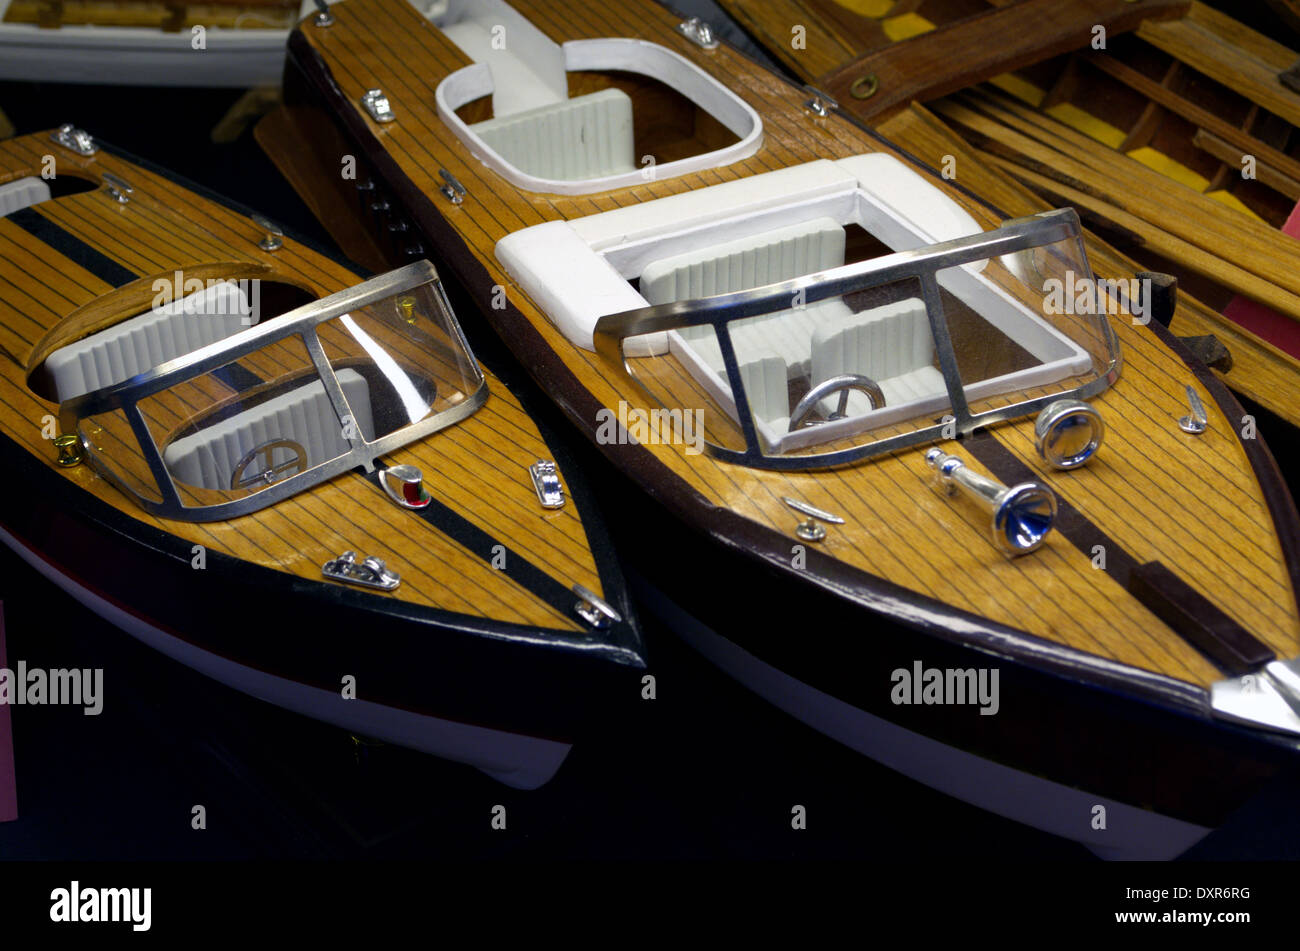 Traditional touristic water taxi boat model in Venice Stock Photo